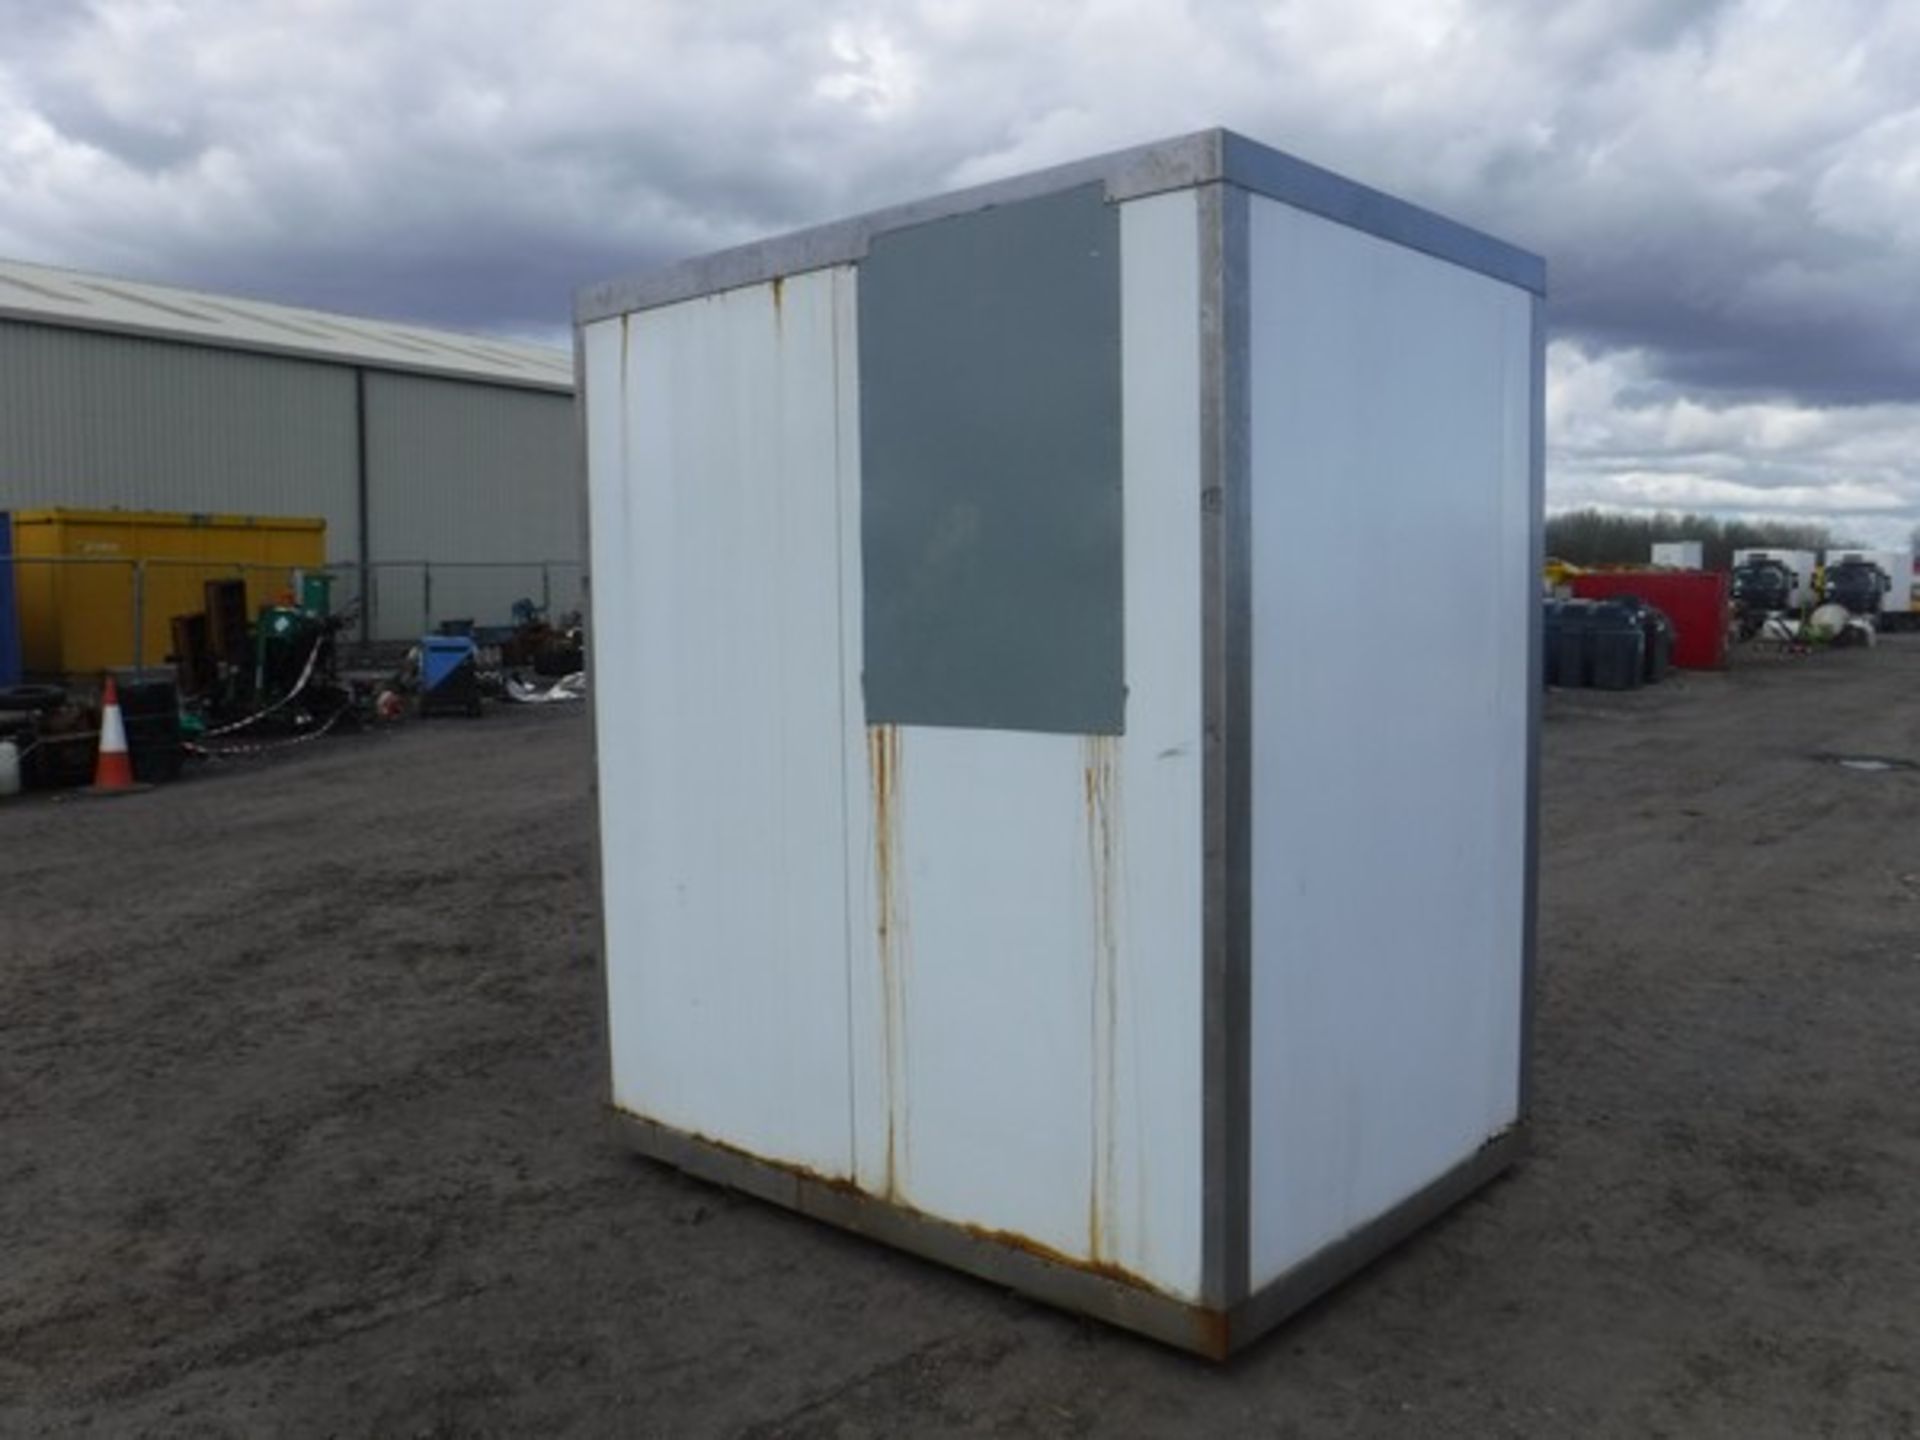 6' X 5' X 7' INSULATED CONTAINER C/W DOUBLE DOORS - Image 2 of 3